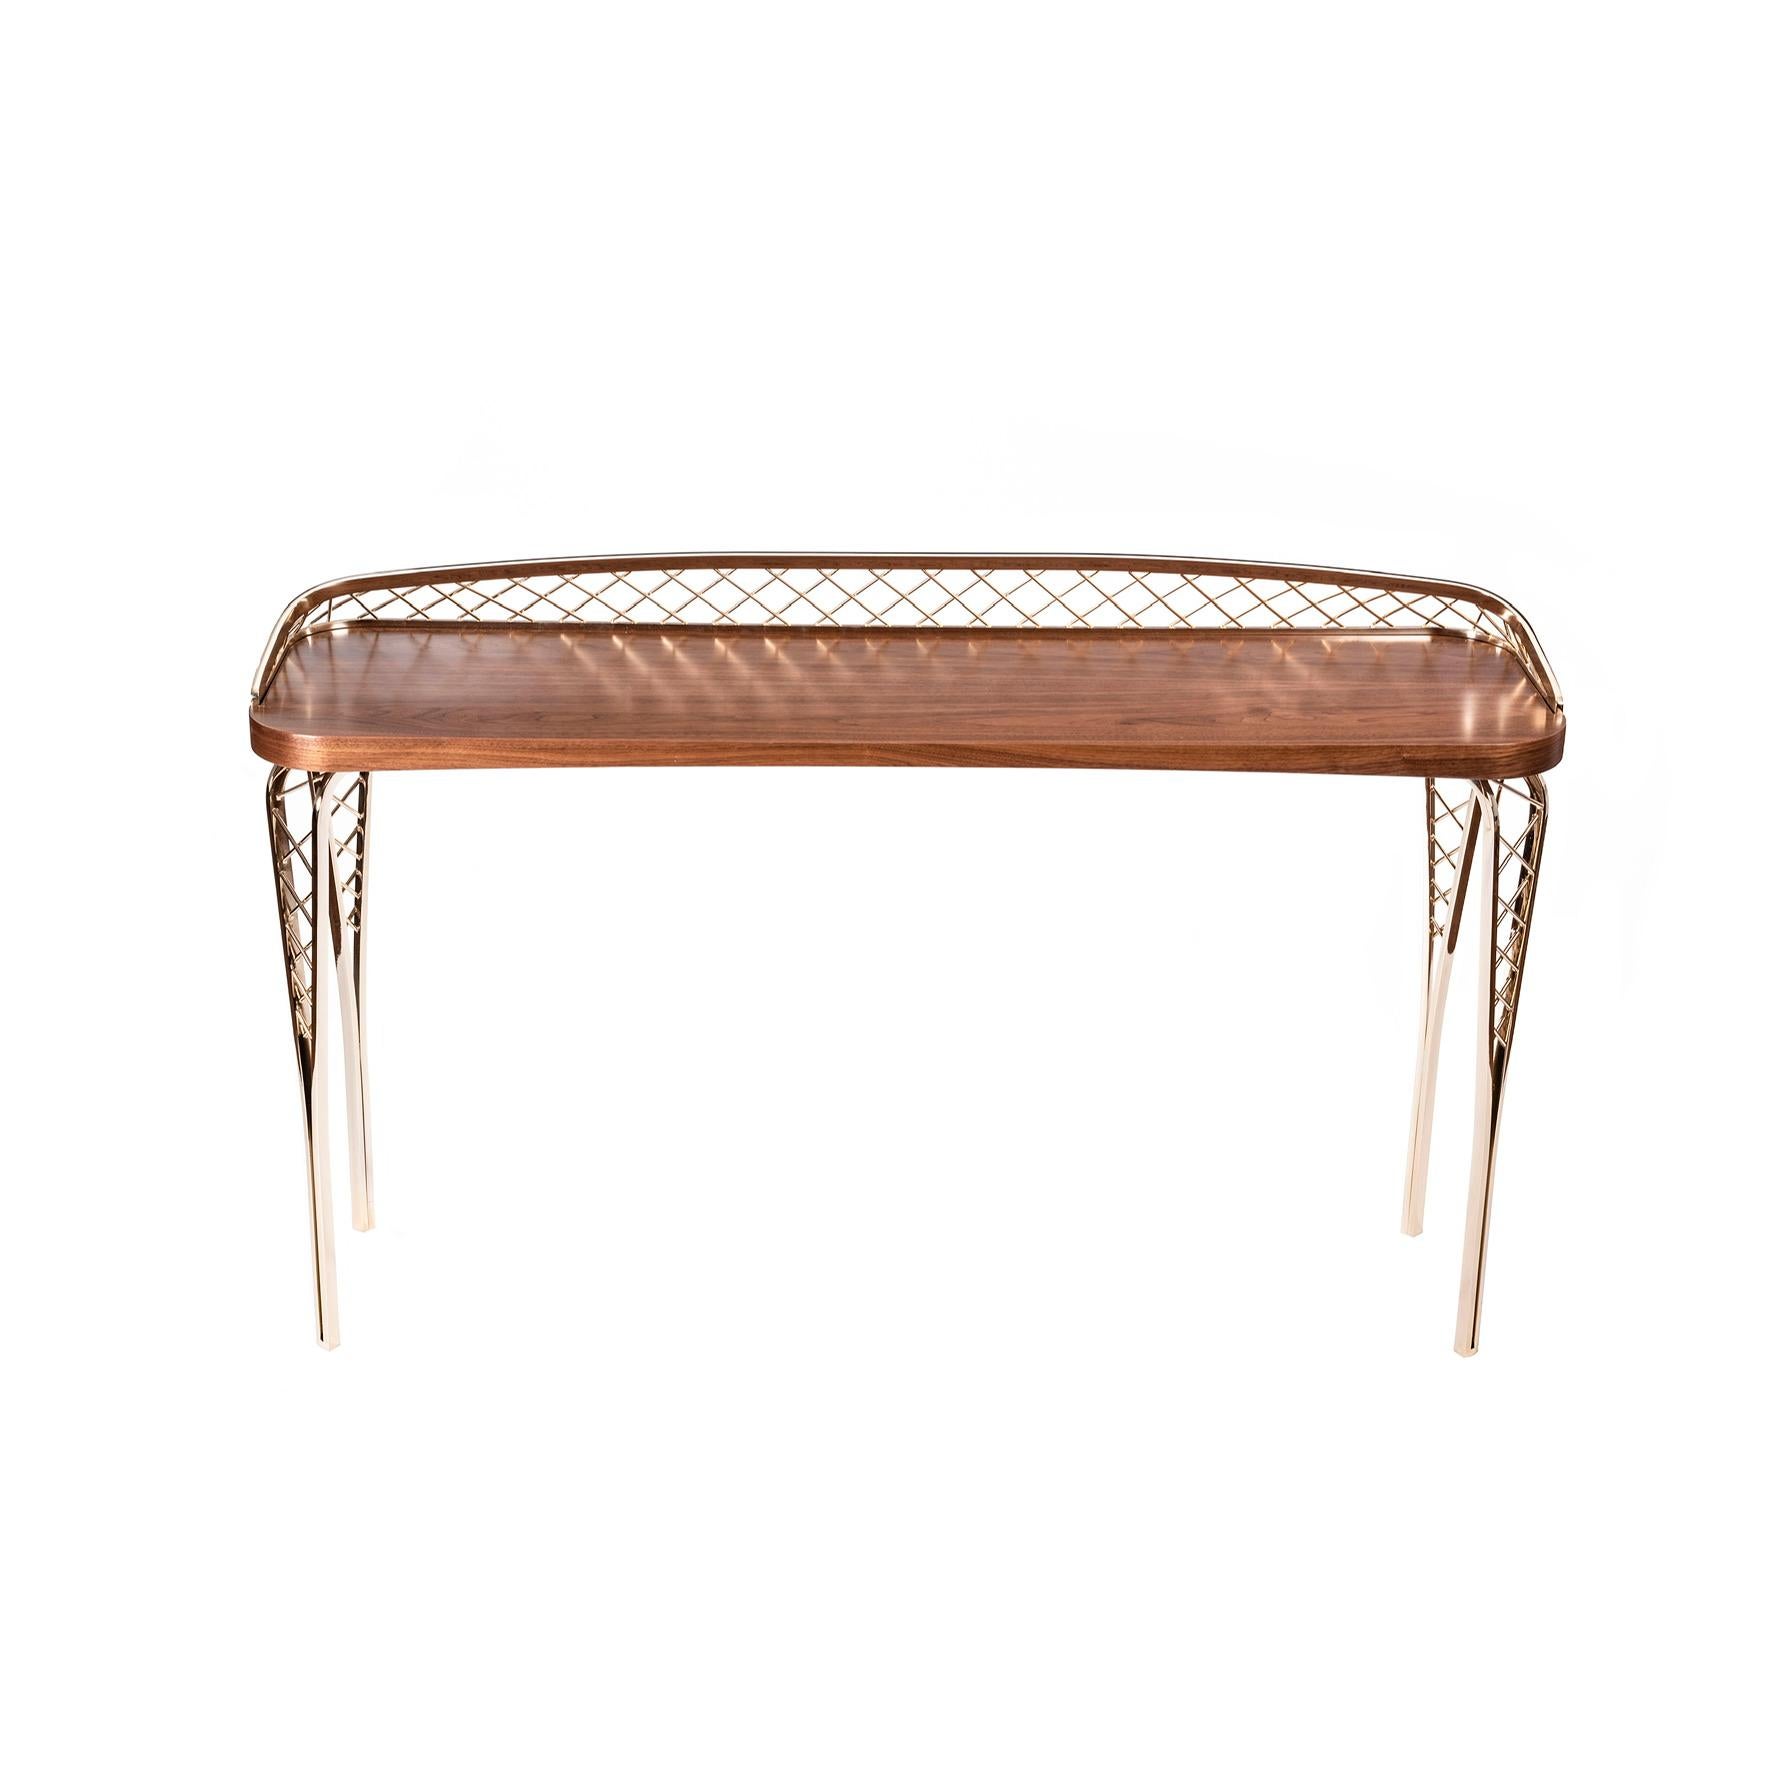 Modern console table Gustav made of wood and champagne stainless steel. The shape of the top and its variations in thickness combined with the metal mesh create an effect of lightness. The combination of straight transverse lines and curves and the